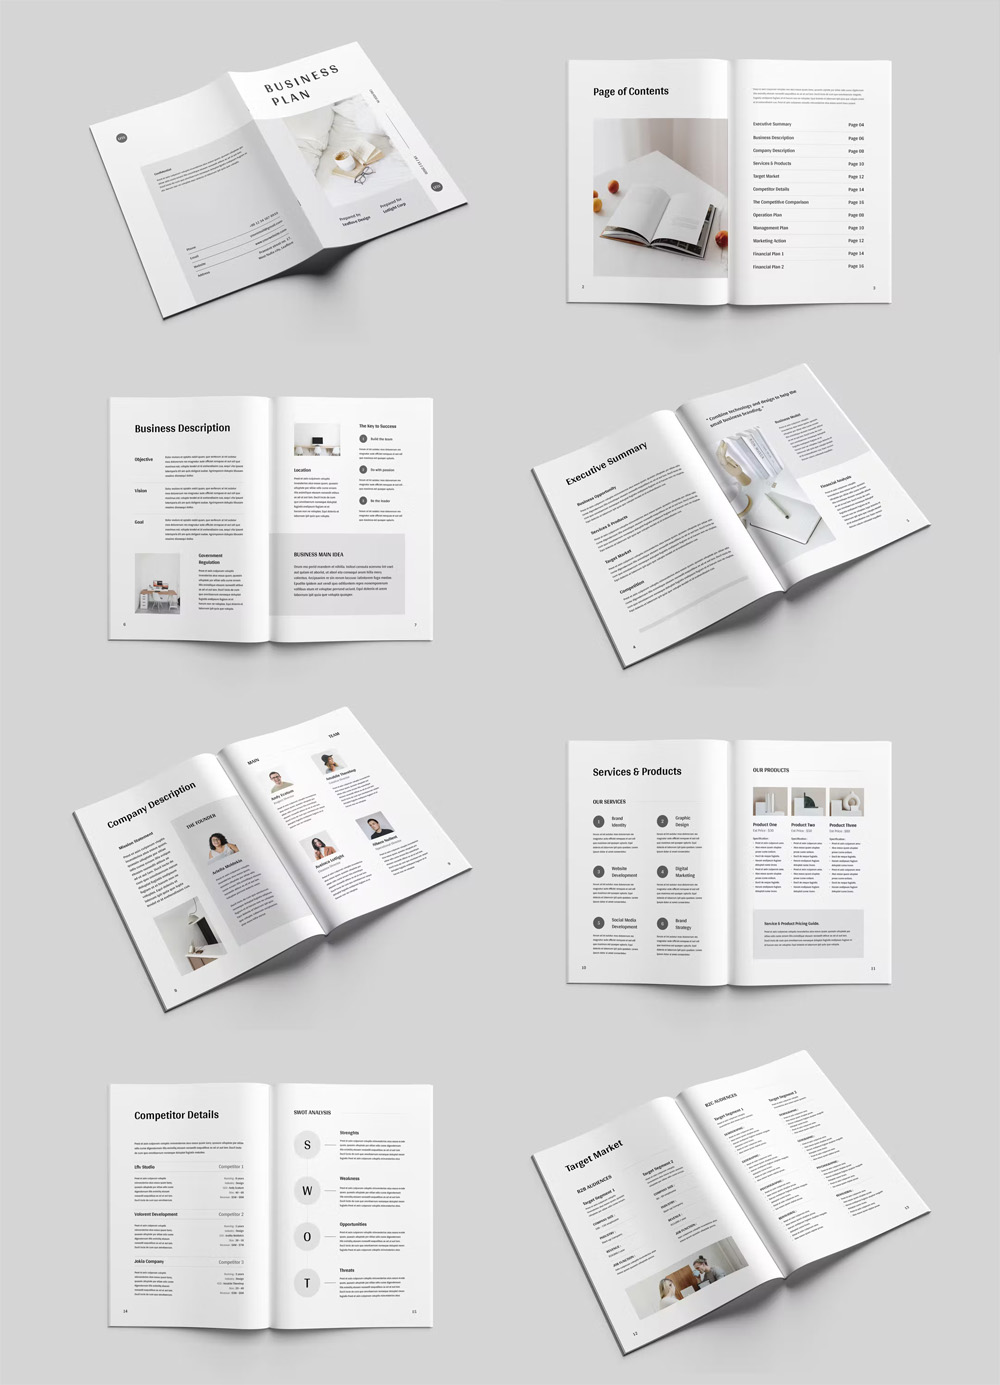 Simple Business Plan InDesign